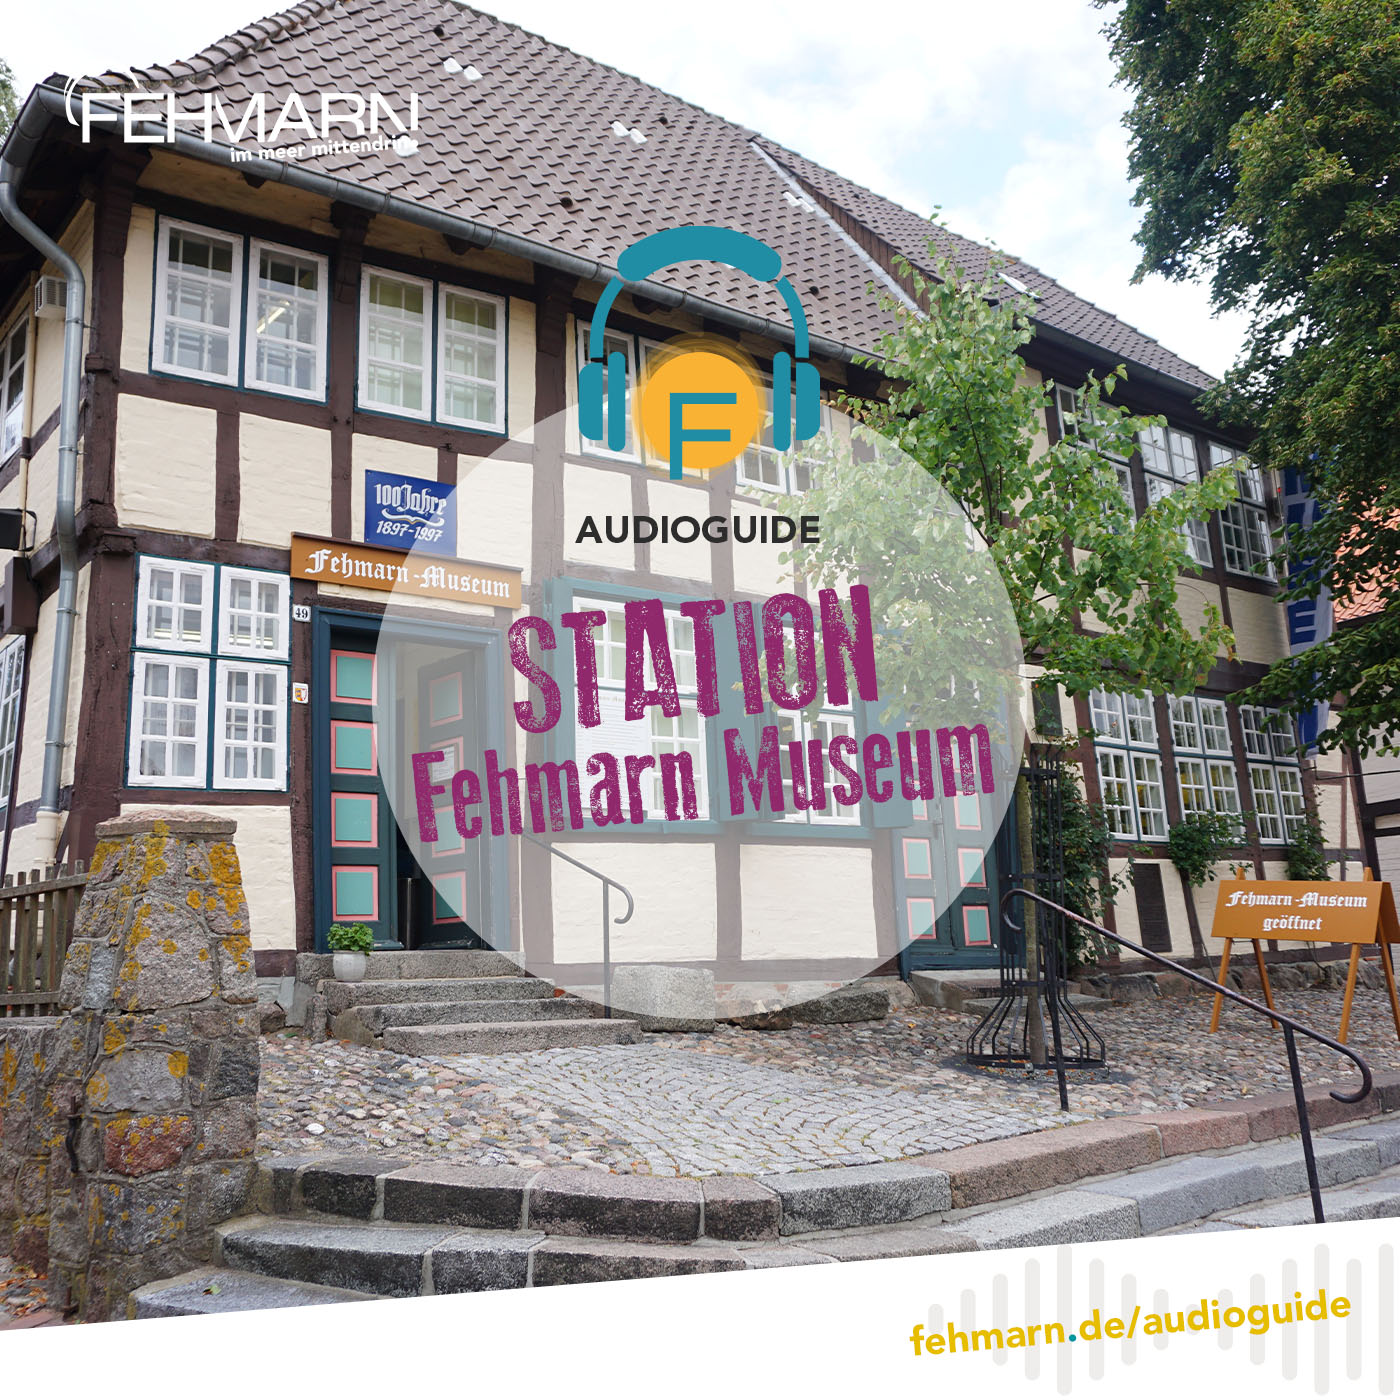 Fehmarn Museum – Audioguide Fehmarn